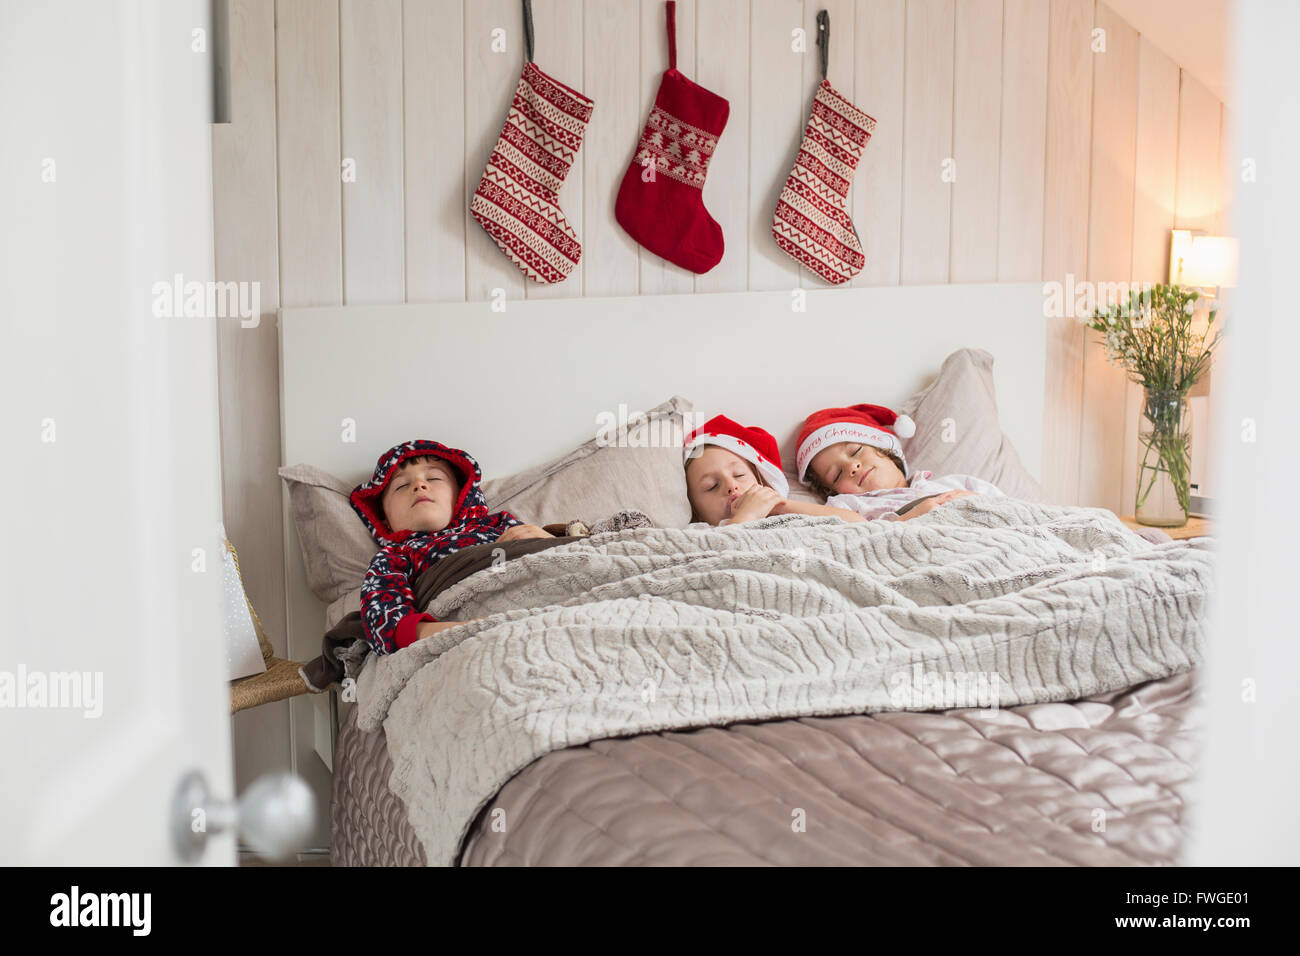 Three children in a double bed, with Christmas stockings hanging on the wall above their heads. Stock Photo